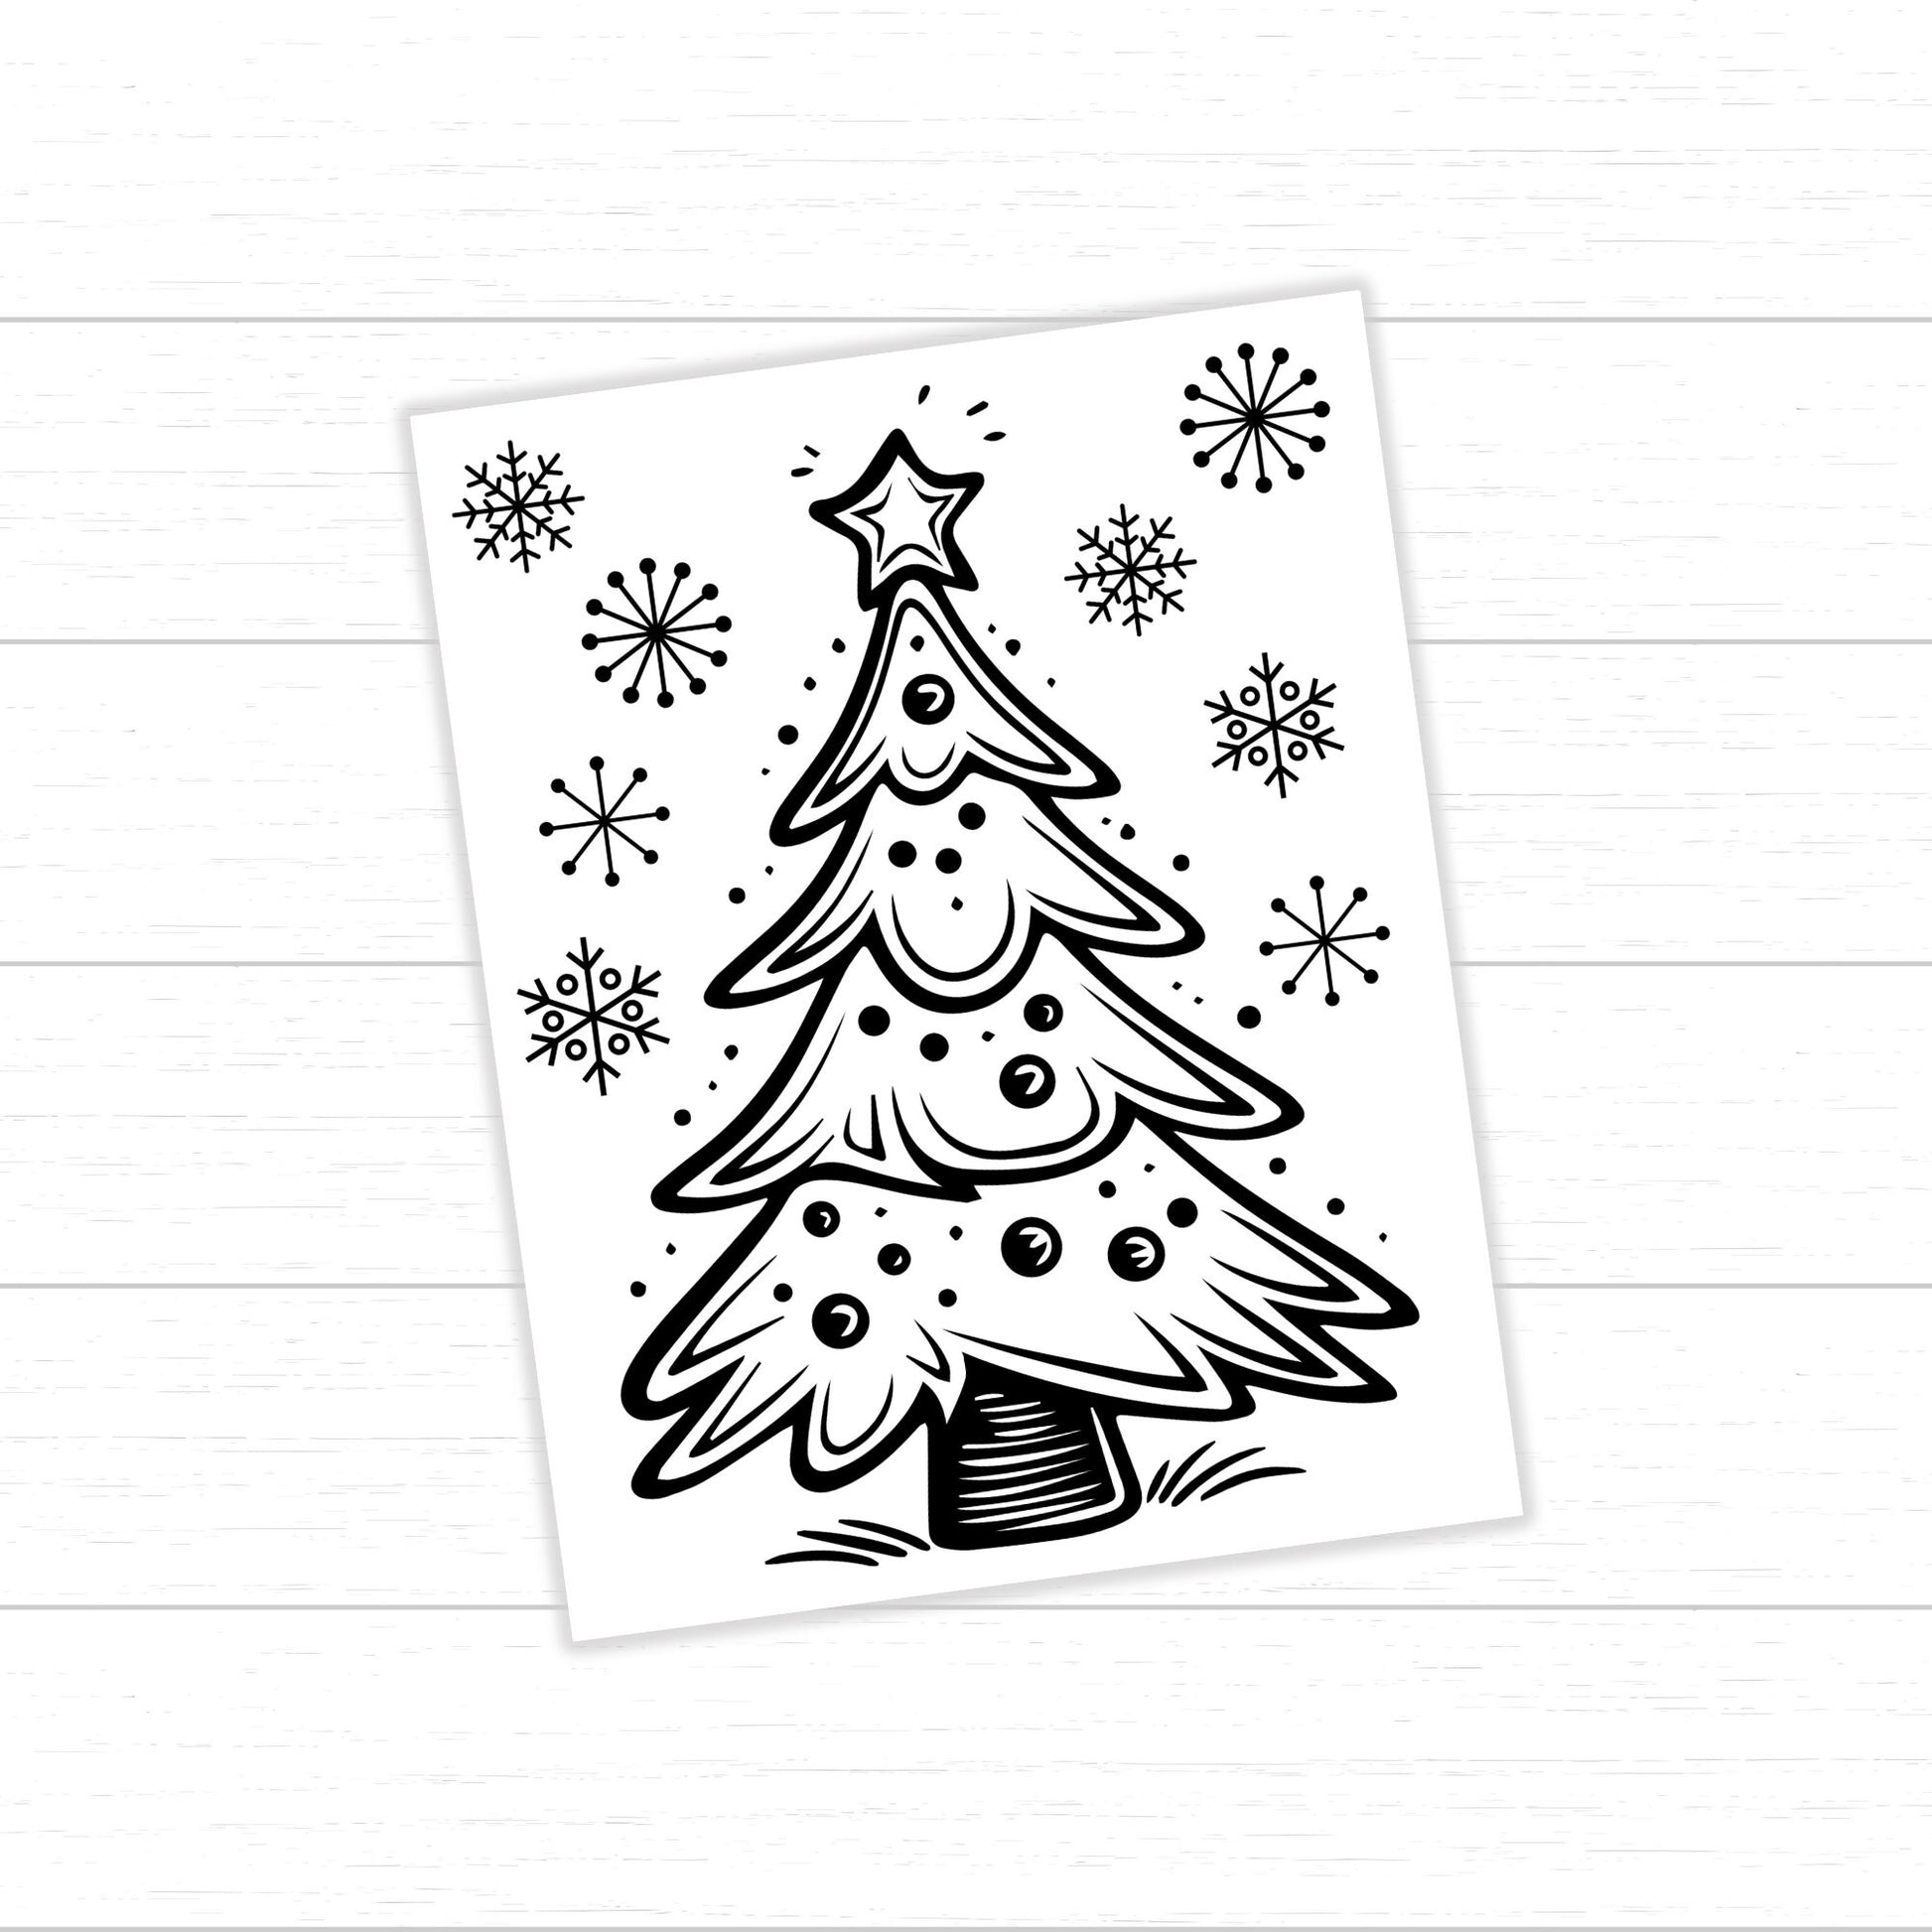 Christmas Tree Coloring Pages, Christmas Coloring Pages, Printable Christmas Activities for Kids, Christmas Tree Activities and Worksheets